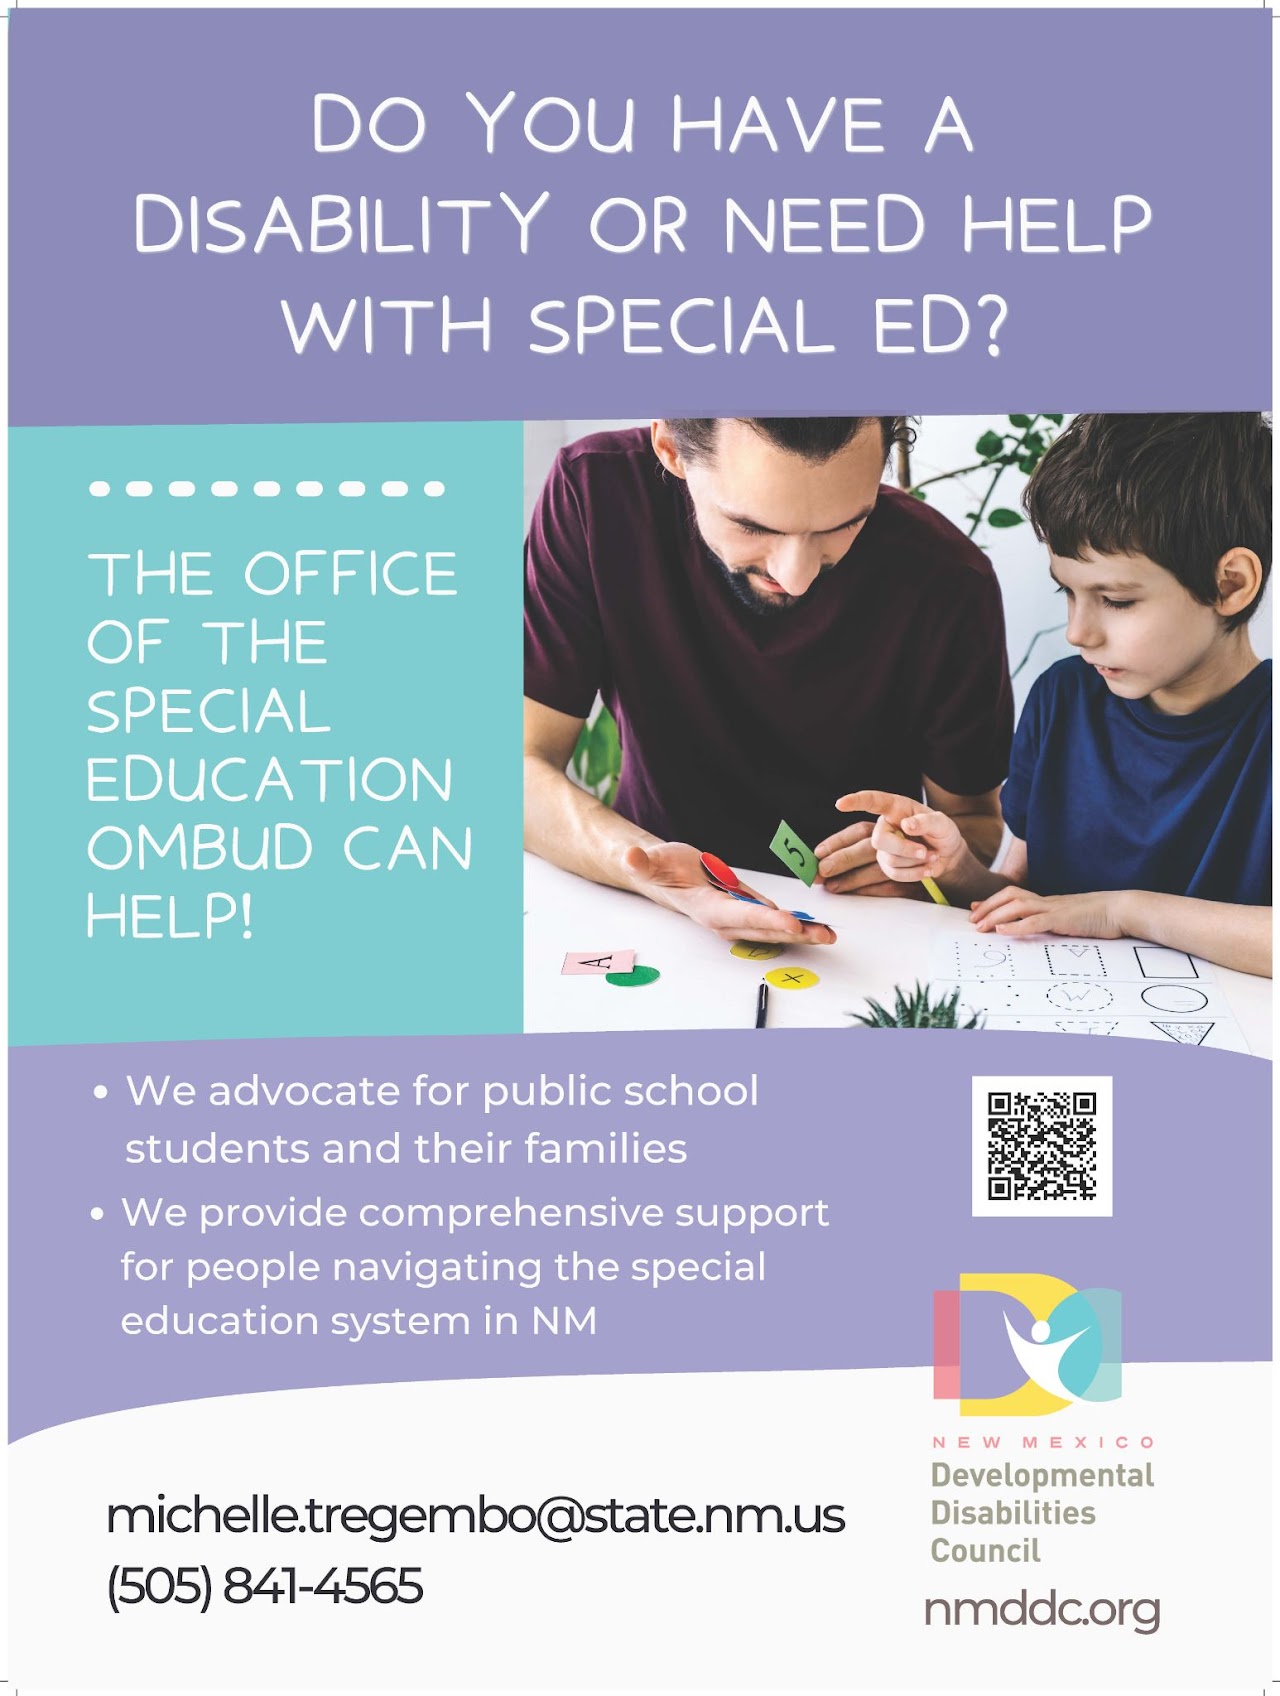 Do you have a disability or need help with special Ed?